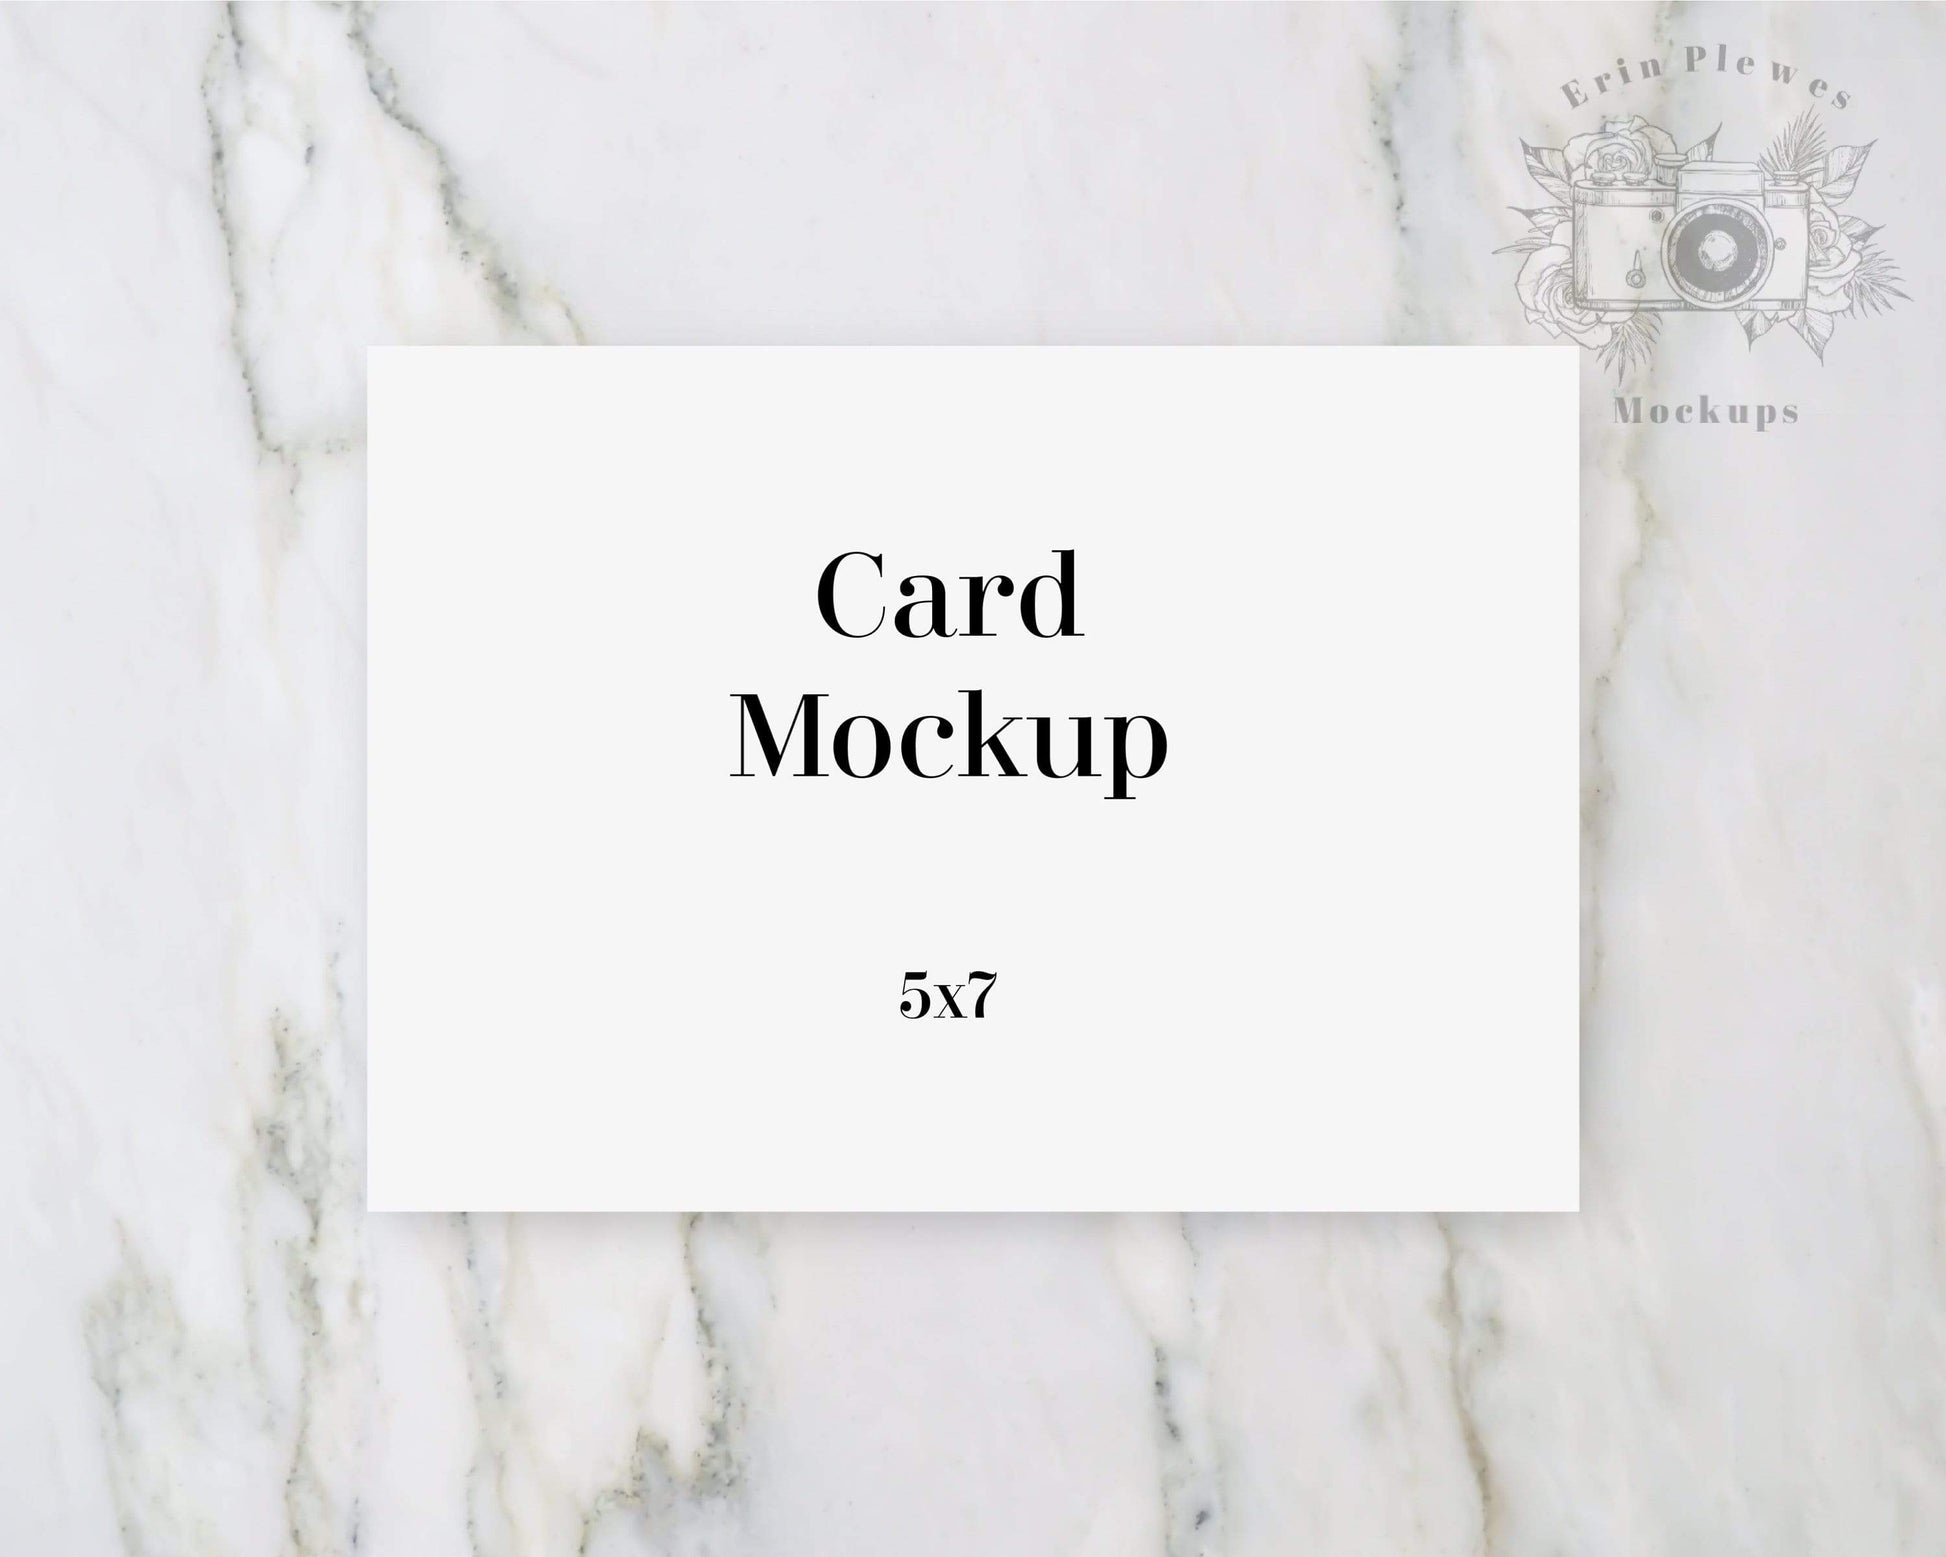 Erin Plewes Mockups Greeting card mockup 5x7, Invitation mock up for wedding thank you stationery flatlay on marble, Jpeg instant Digital Download Template